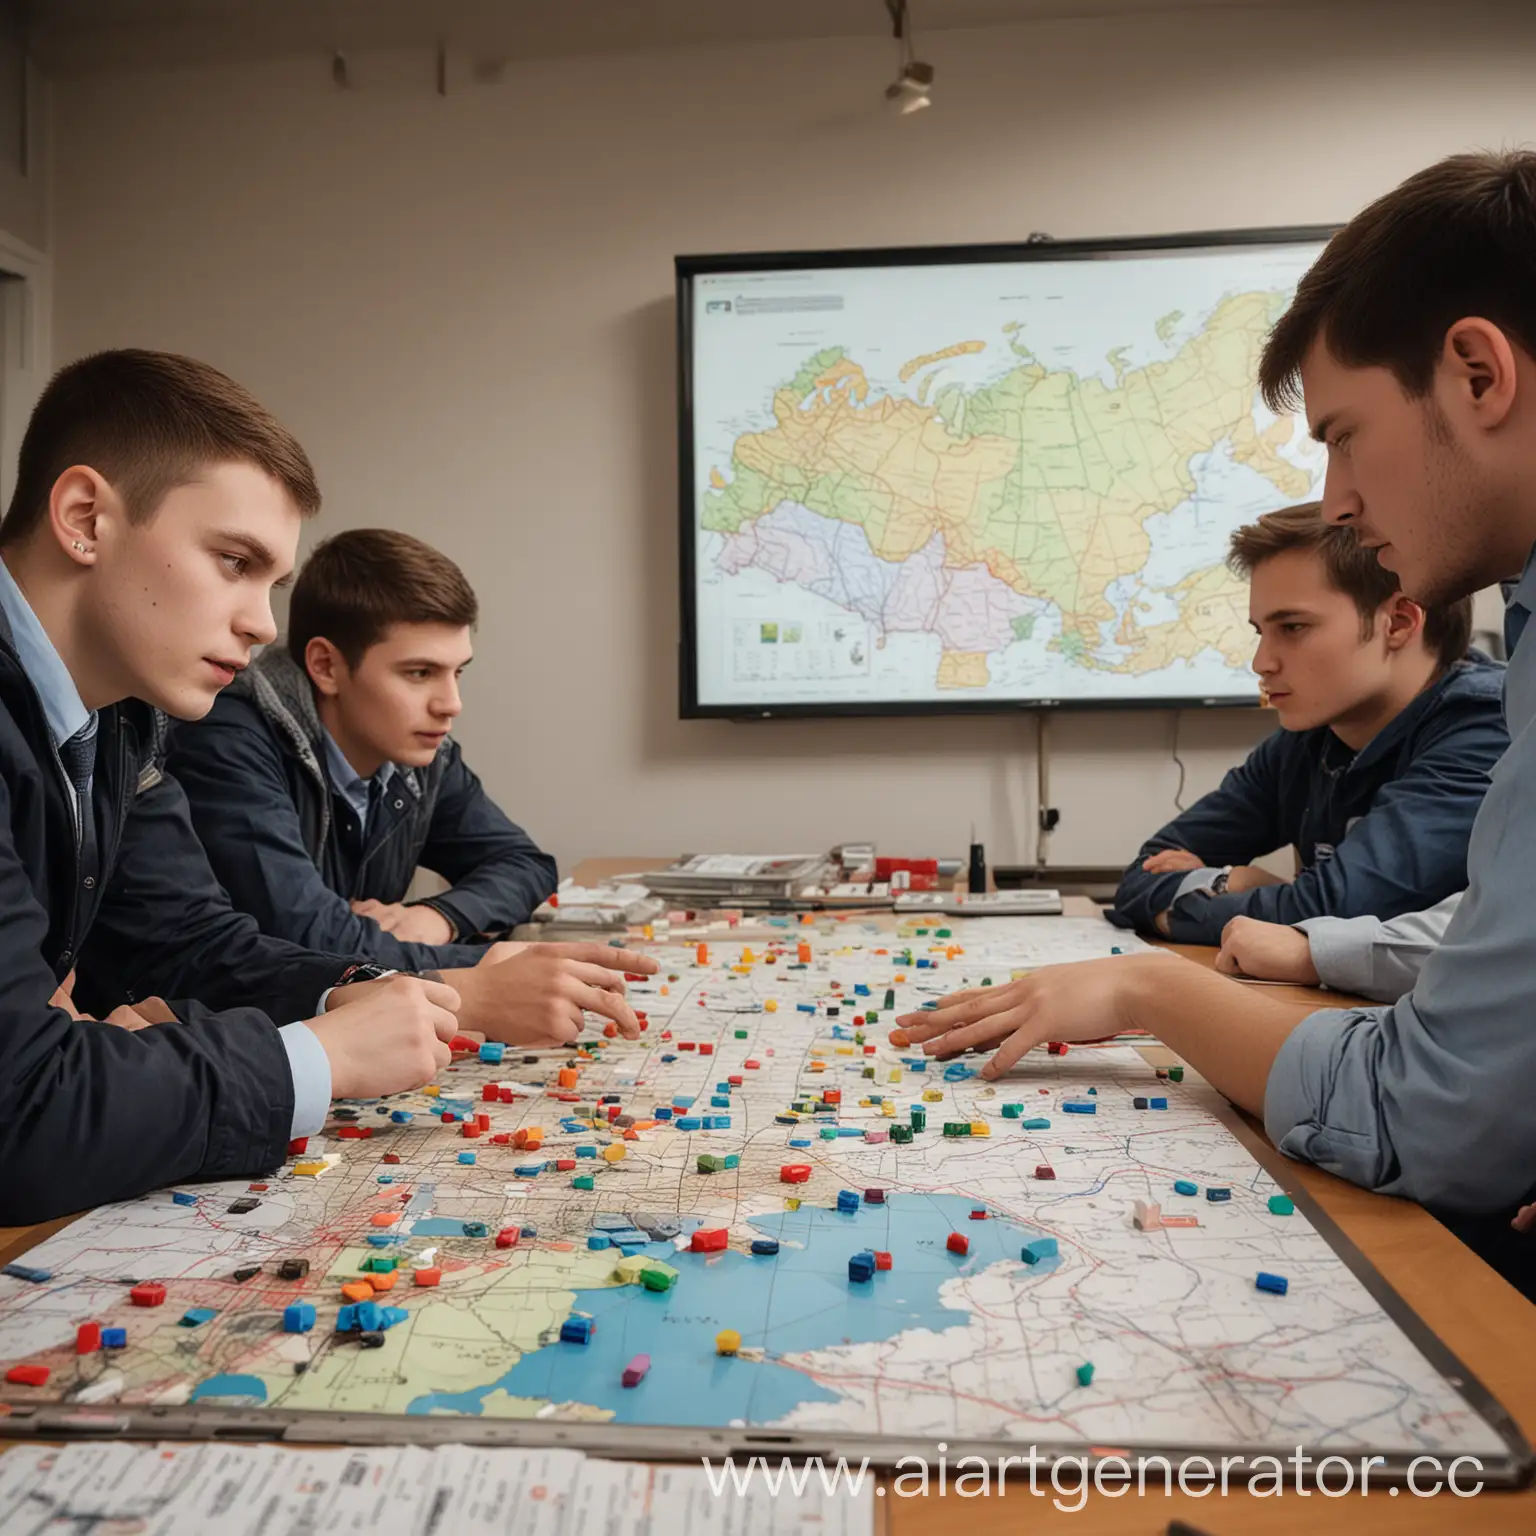 Young-Russian-Railroad-Workers-Engage-in-Strategic-Board-Game-Session